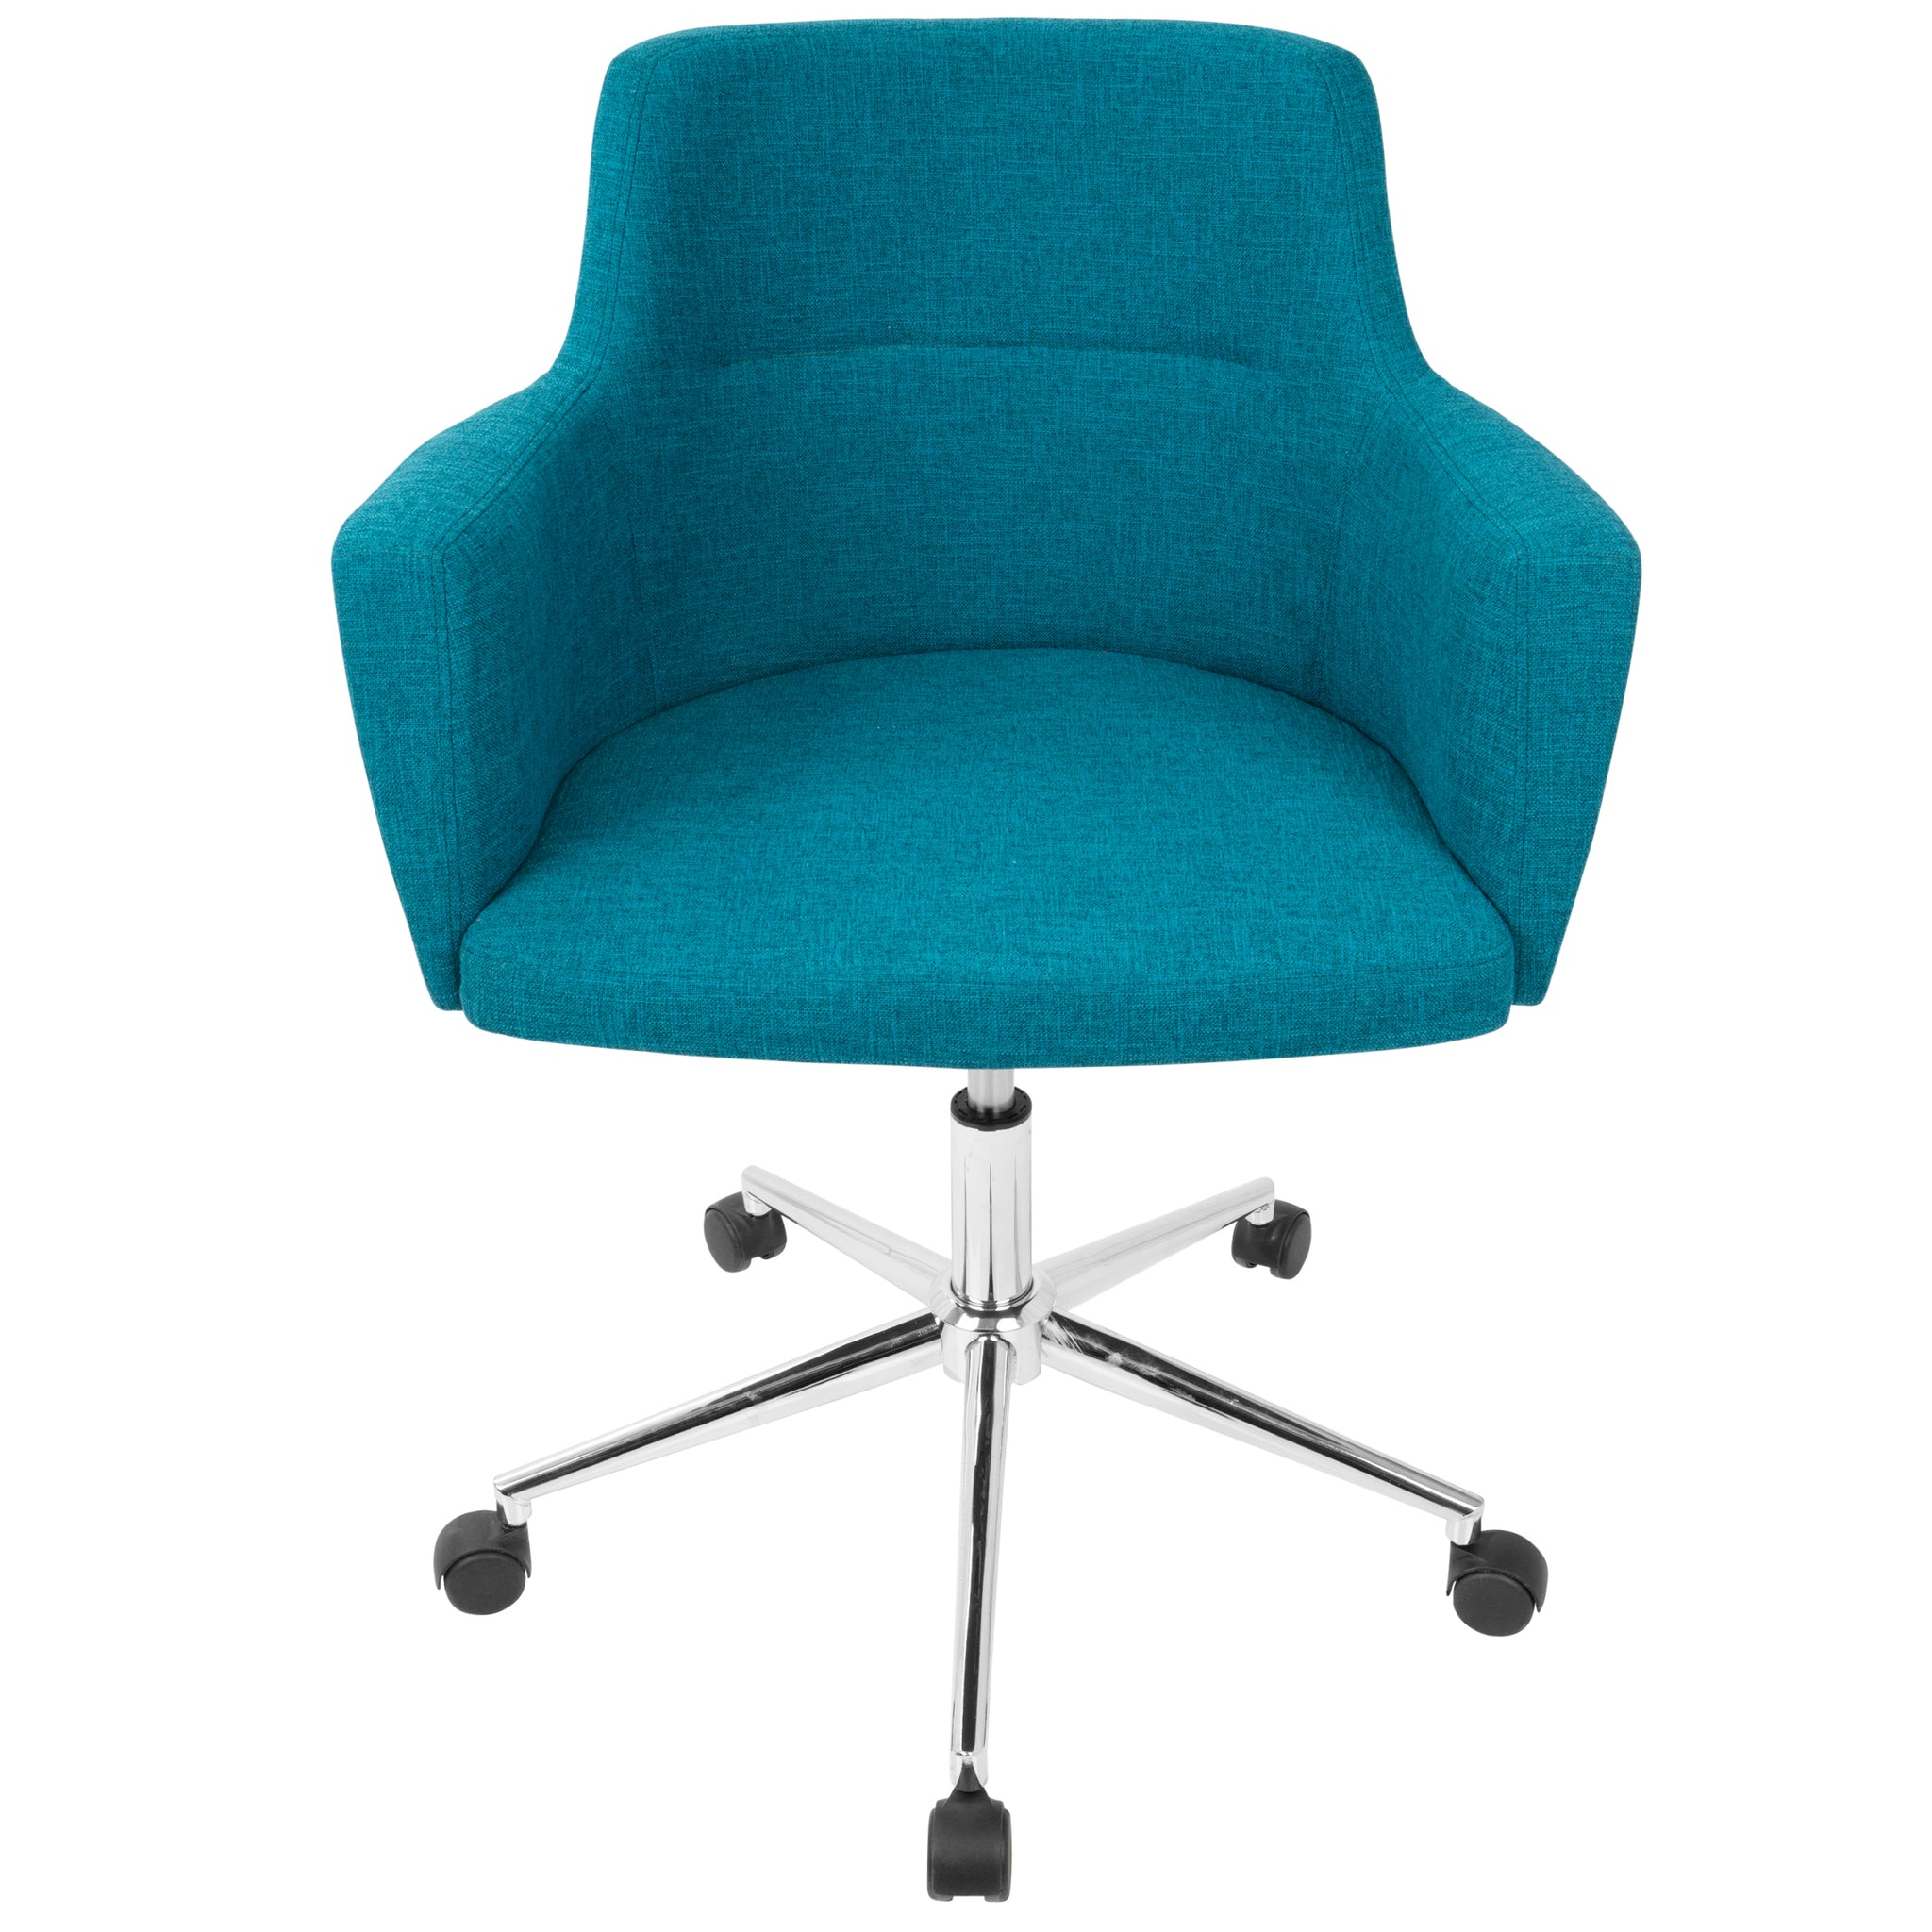 Andrew Contemporary Adjustable Office Chair in Teal by teal-fabric